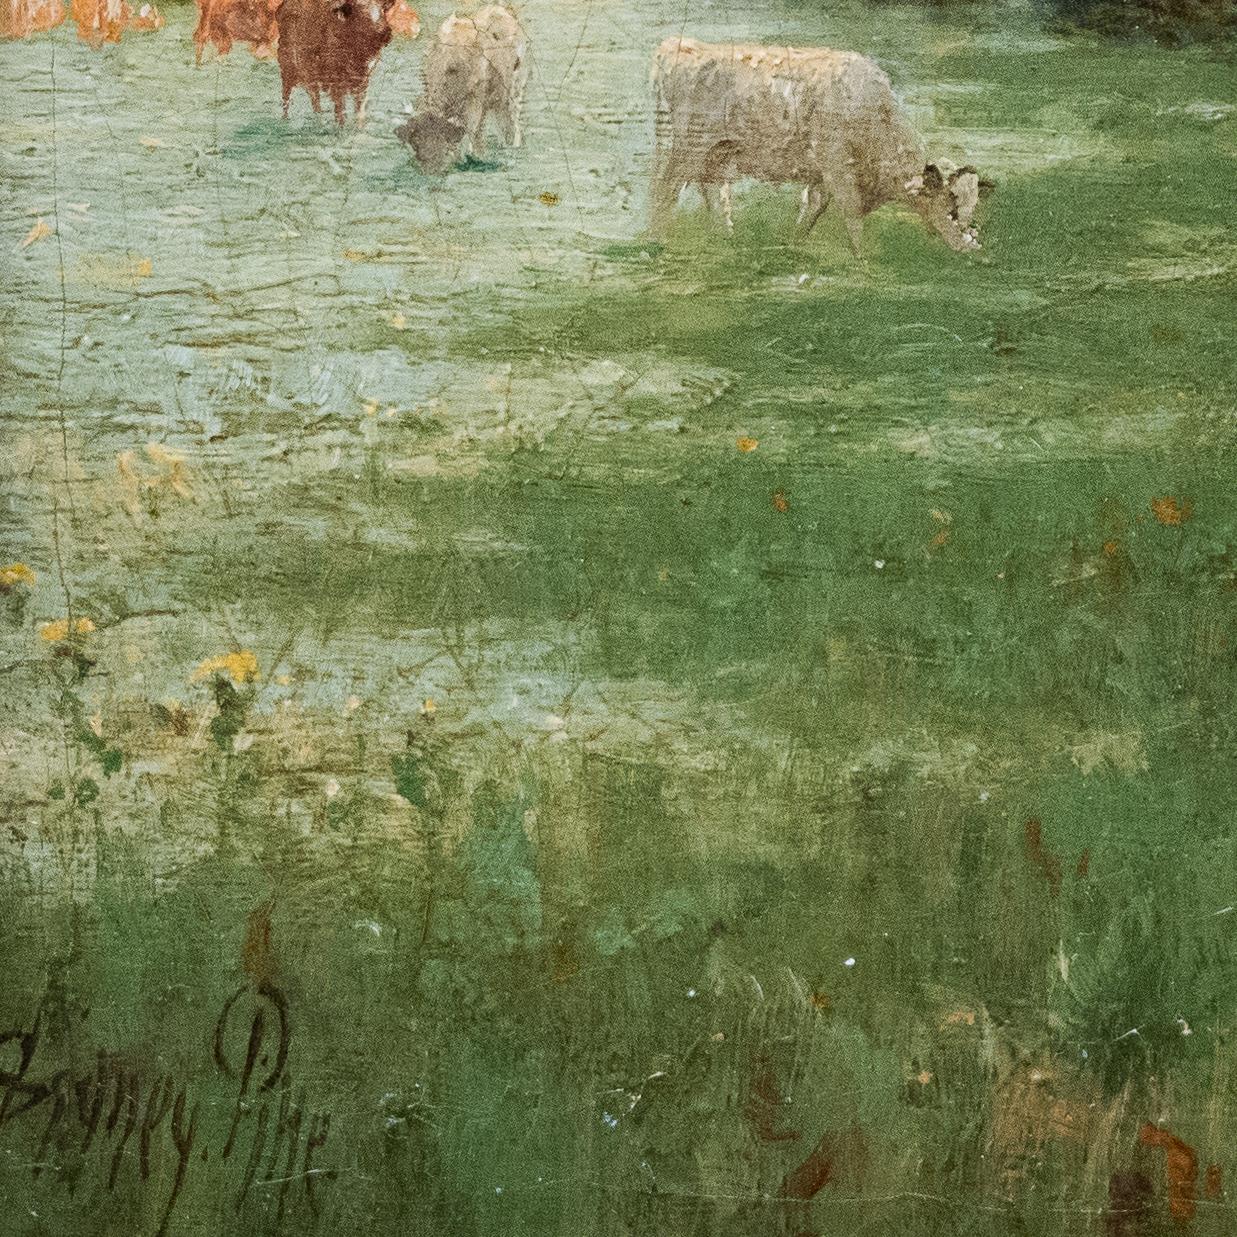 A wonderful painting by British artist Sidney Pike (1846-1907).
Pike is best known for his depictions of the English countryside, and he attended many times at the Royal Academy Exhibitions.  


Title: Summer Landscape With Cattle

info:
oil on